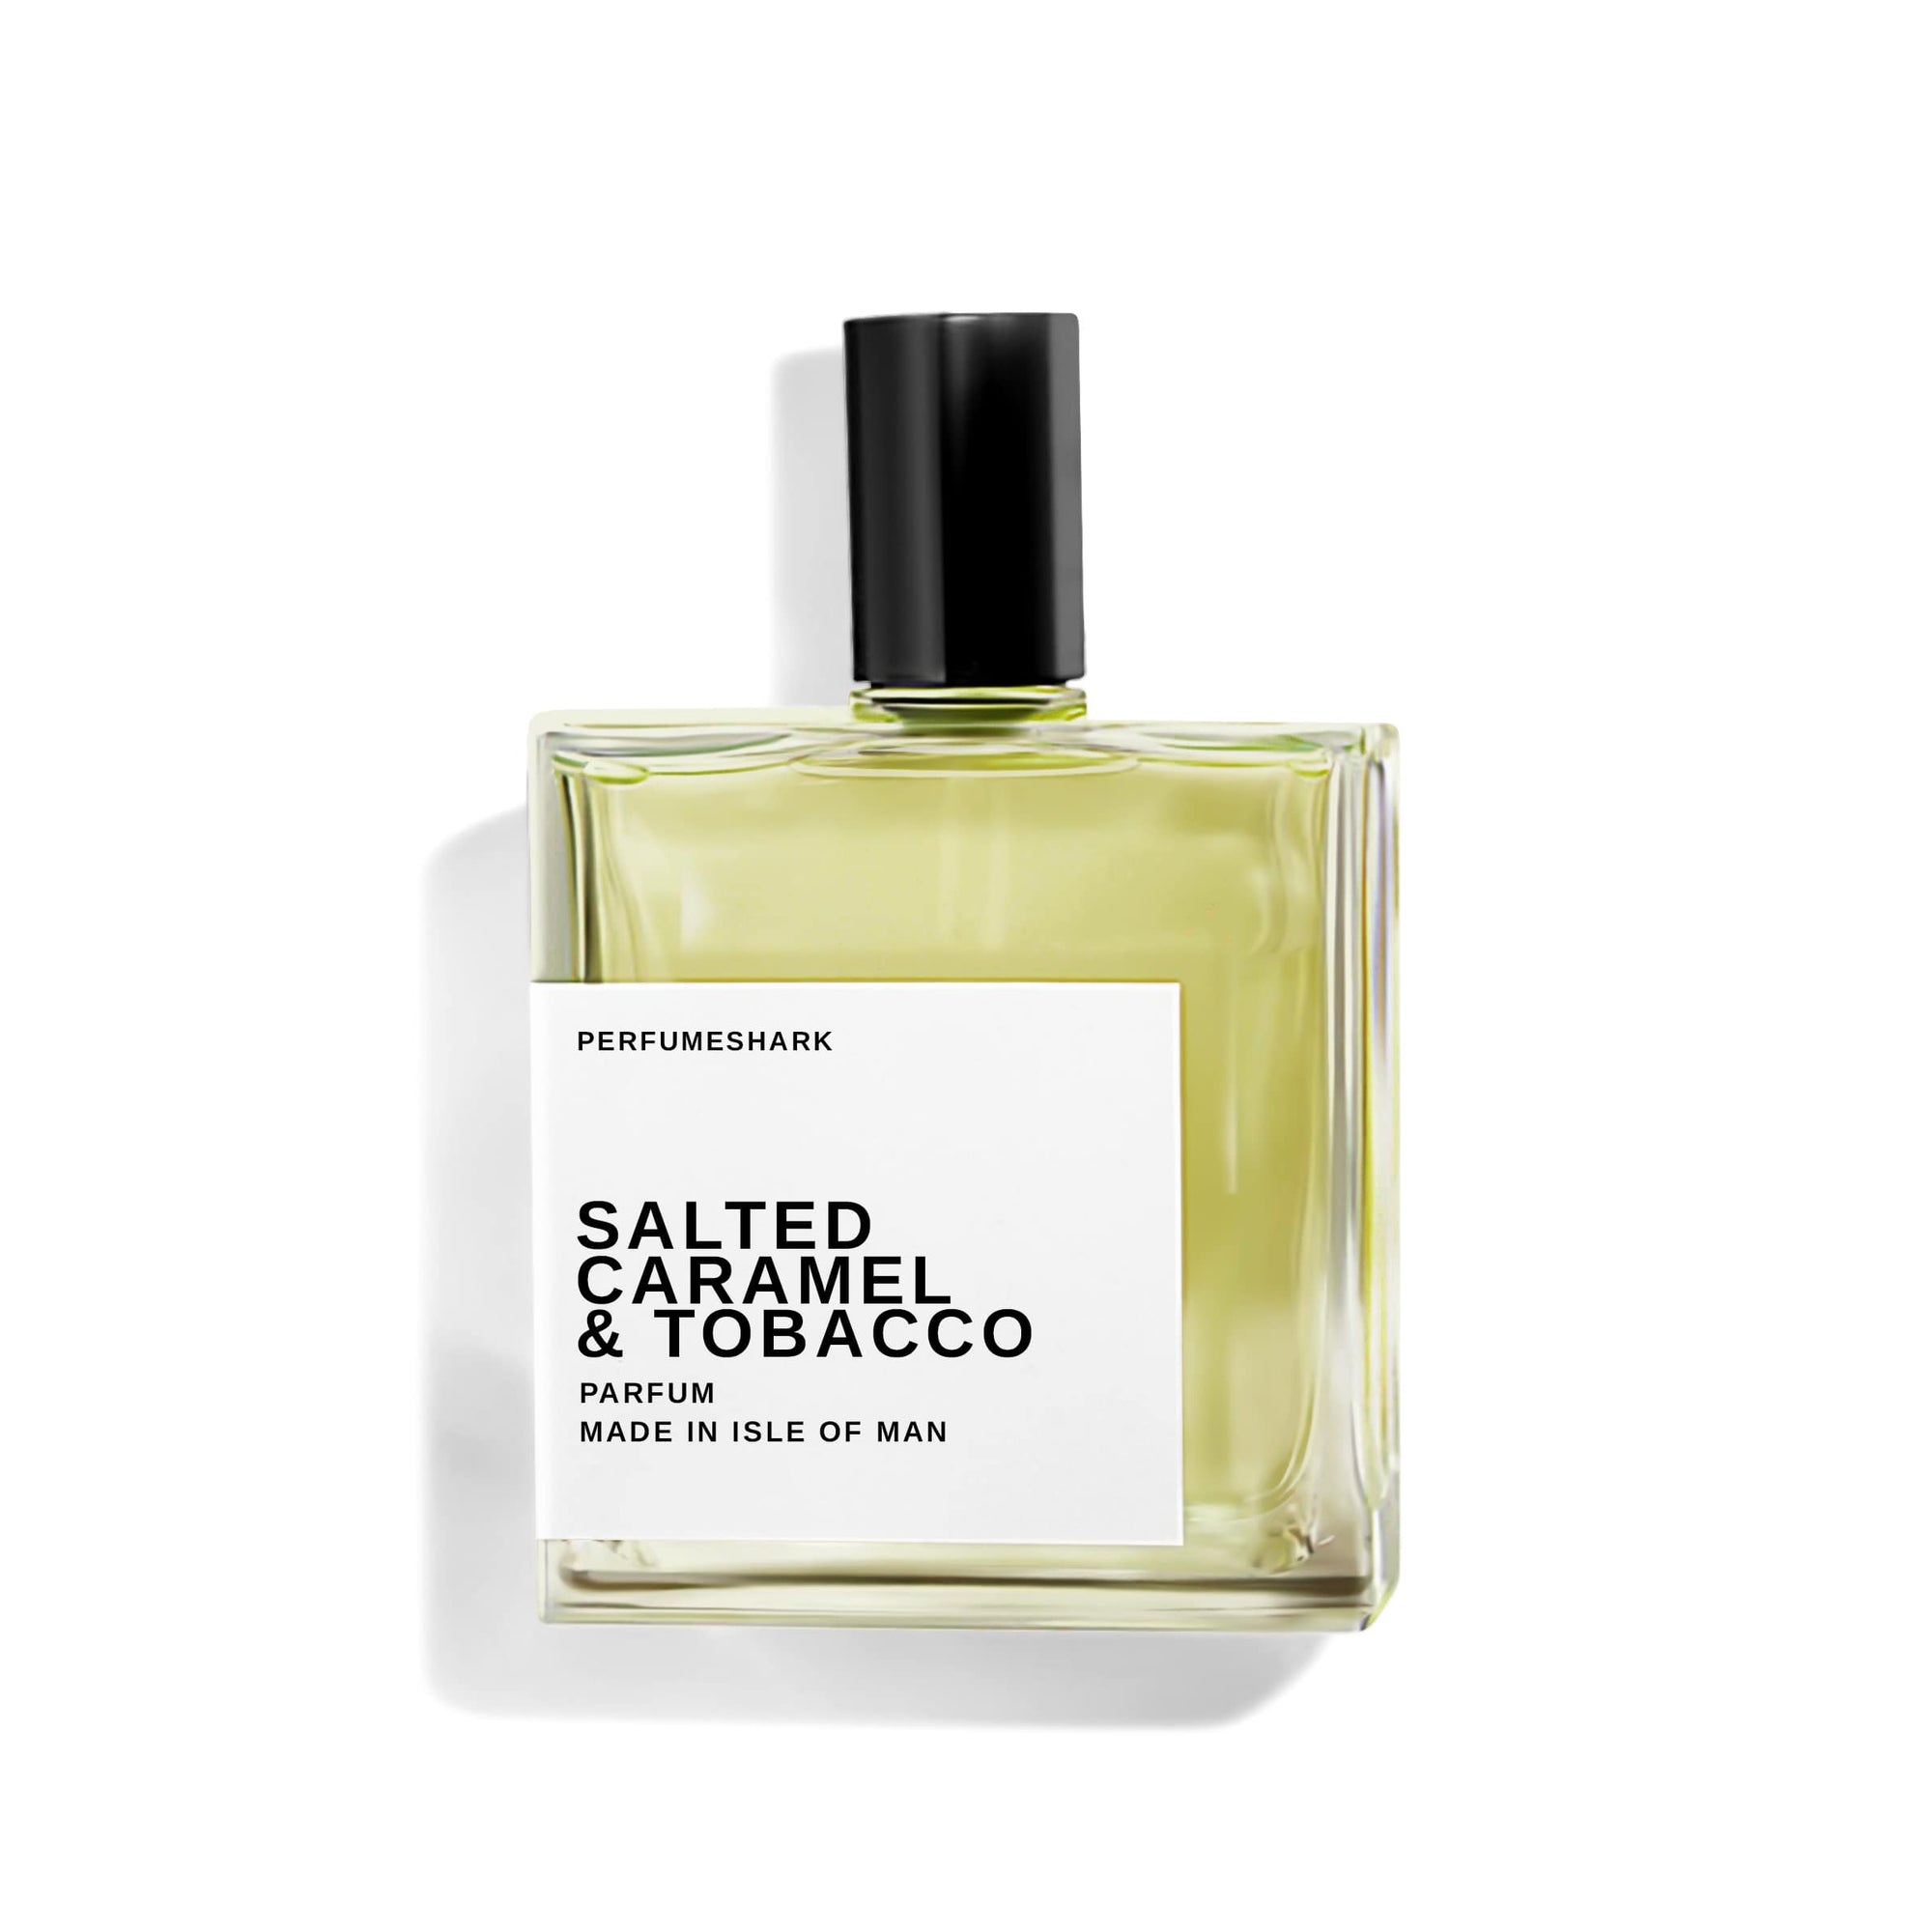 Salted Caramel & Tobacco - With Similar Fragrant Notes to Penhaligon’s Changing Constance